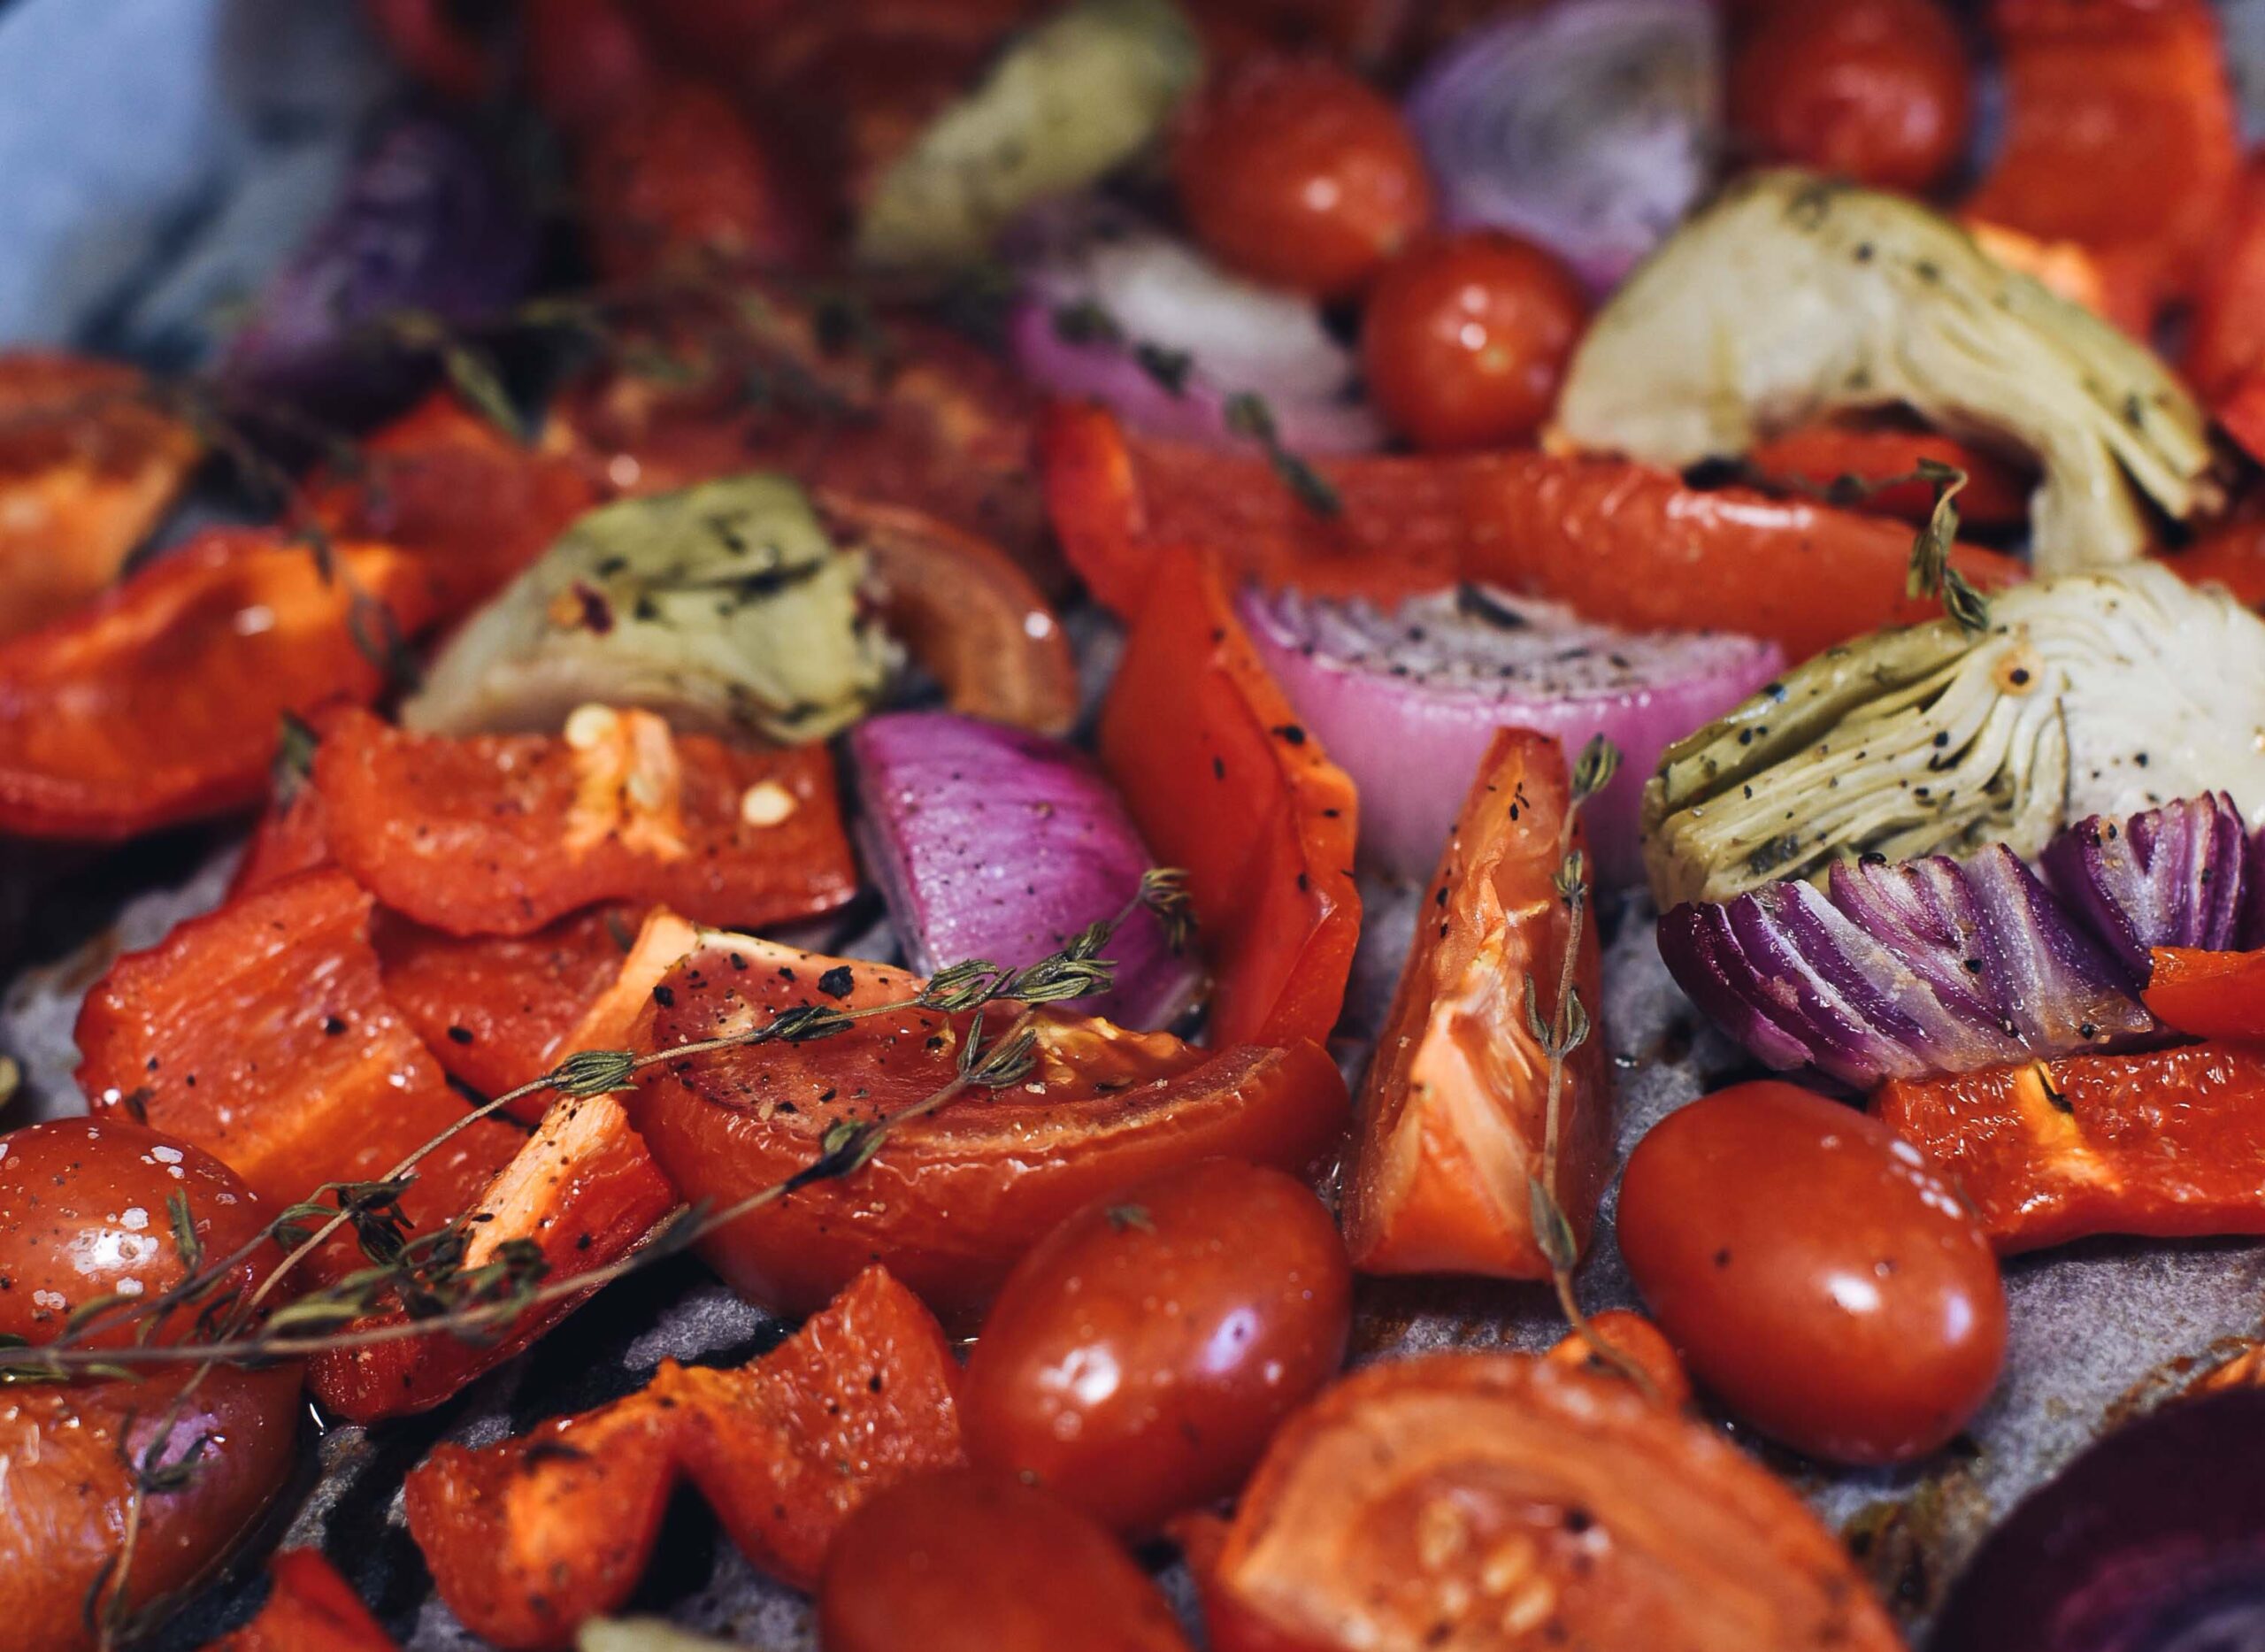 A pan of roasted vegetables including tomatoes, onions, artichokes, herbs and cracked black pepper.